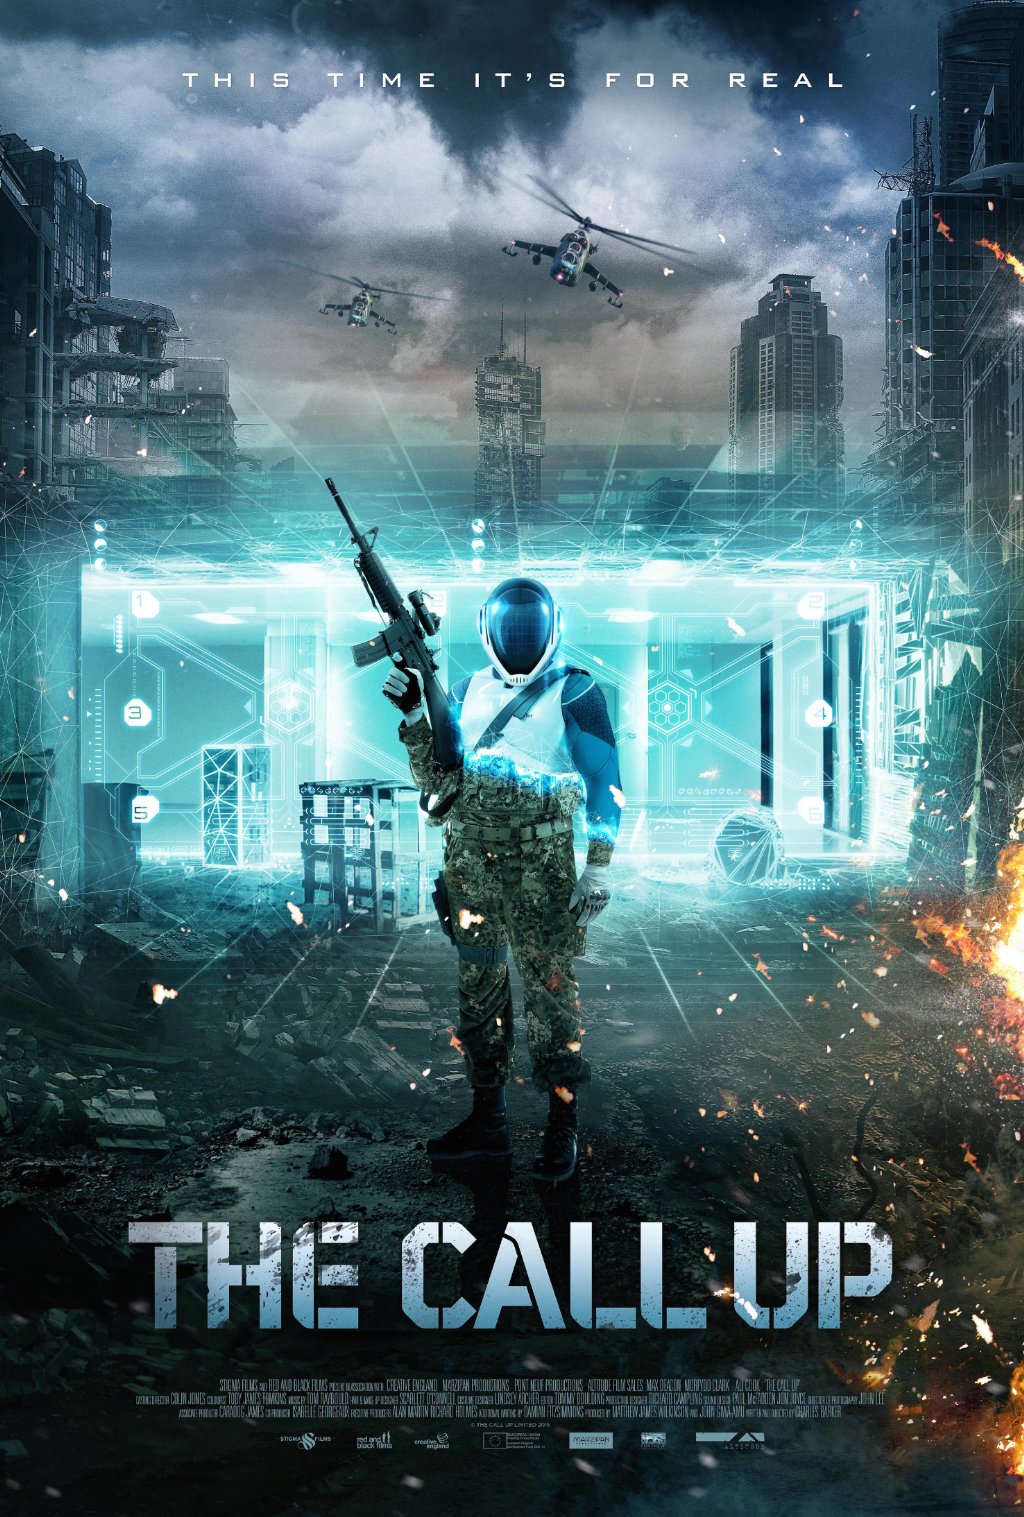 http://s7.picofile.com/file/8256231092/The_Call_Up_2016.jpg